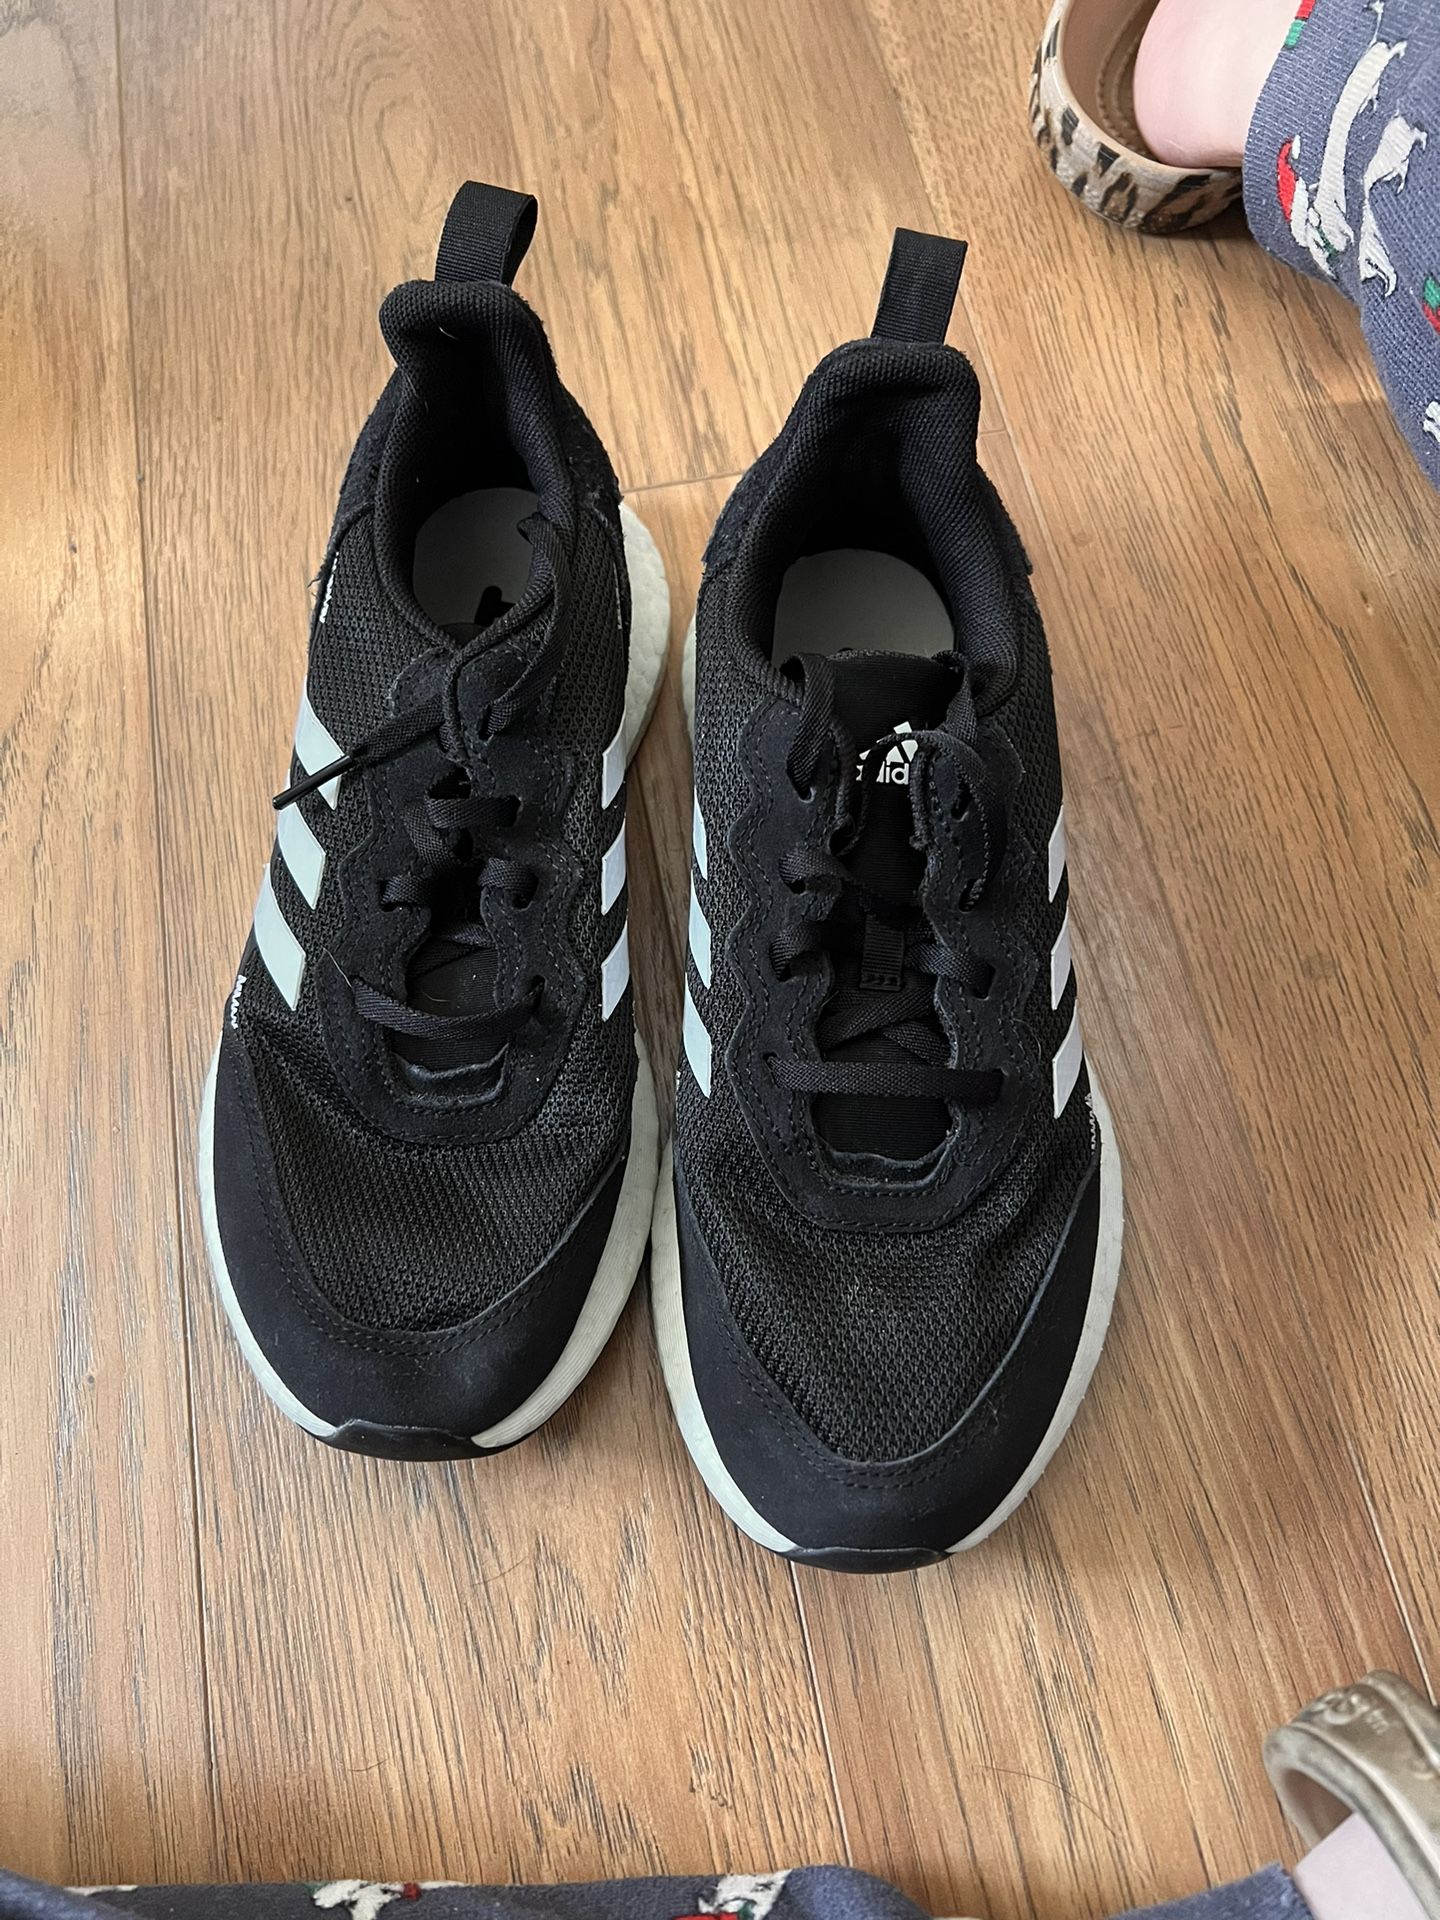 Adidas Boys Size 4 Boost Sneakers